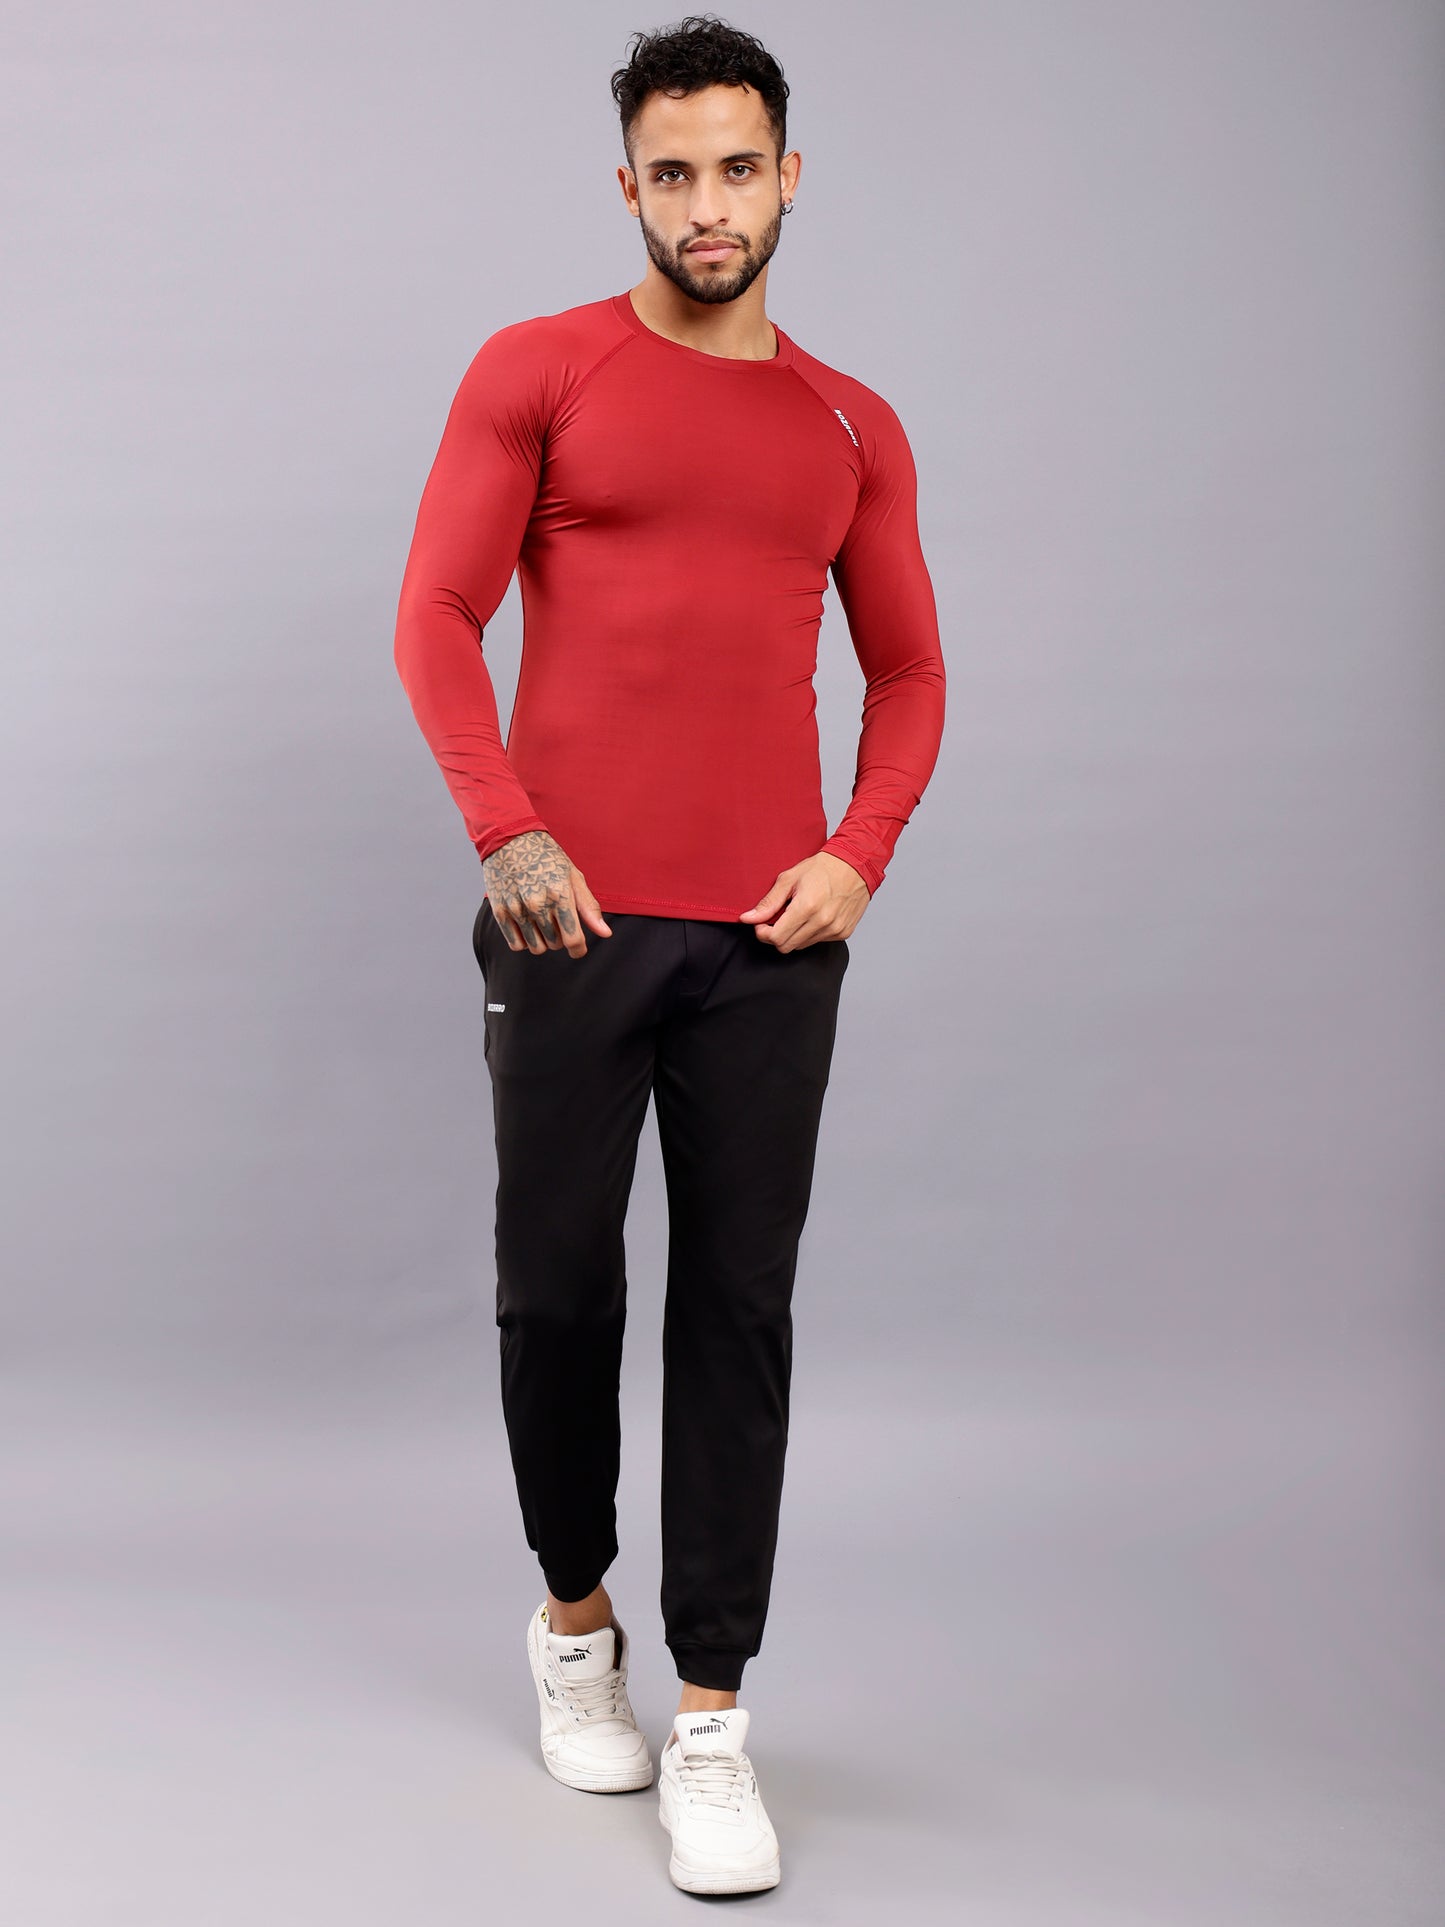 Round neck Compression Full sleeve tshirt-red